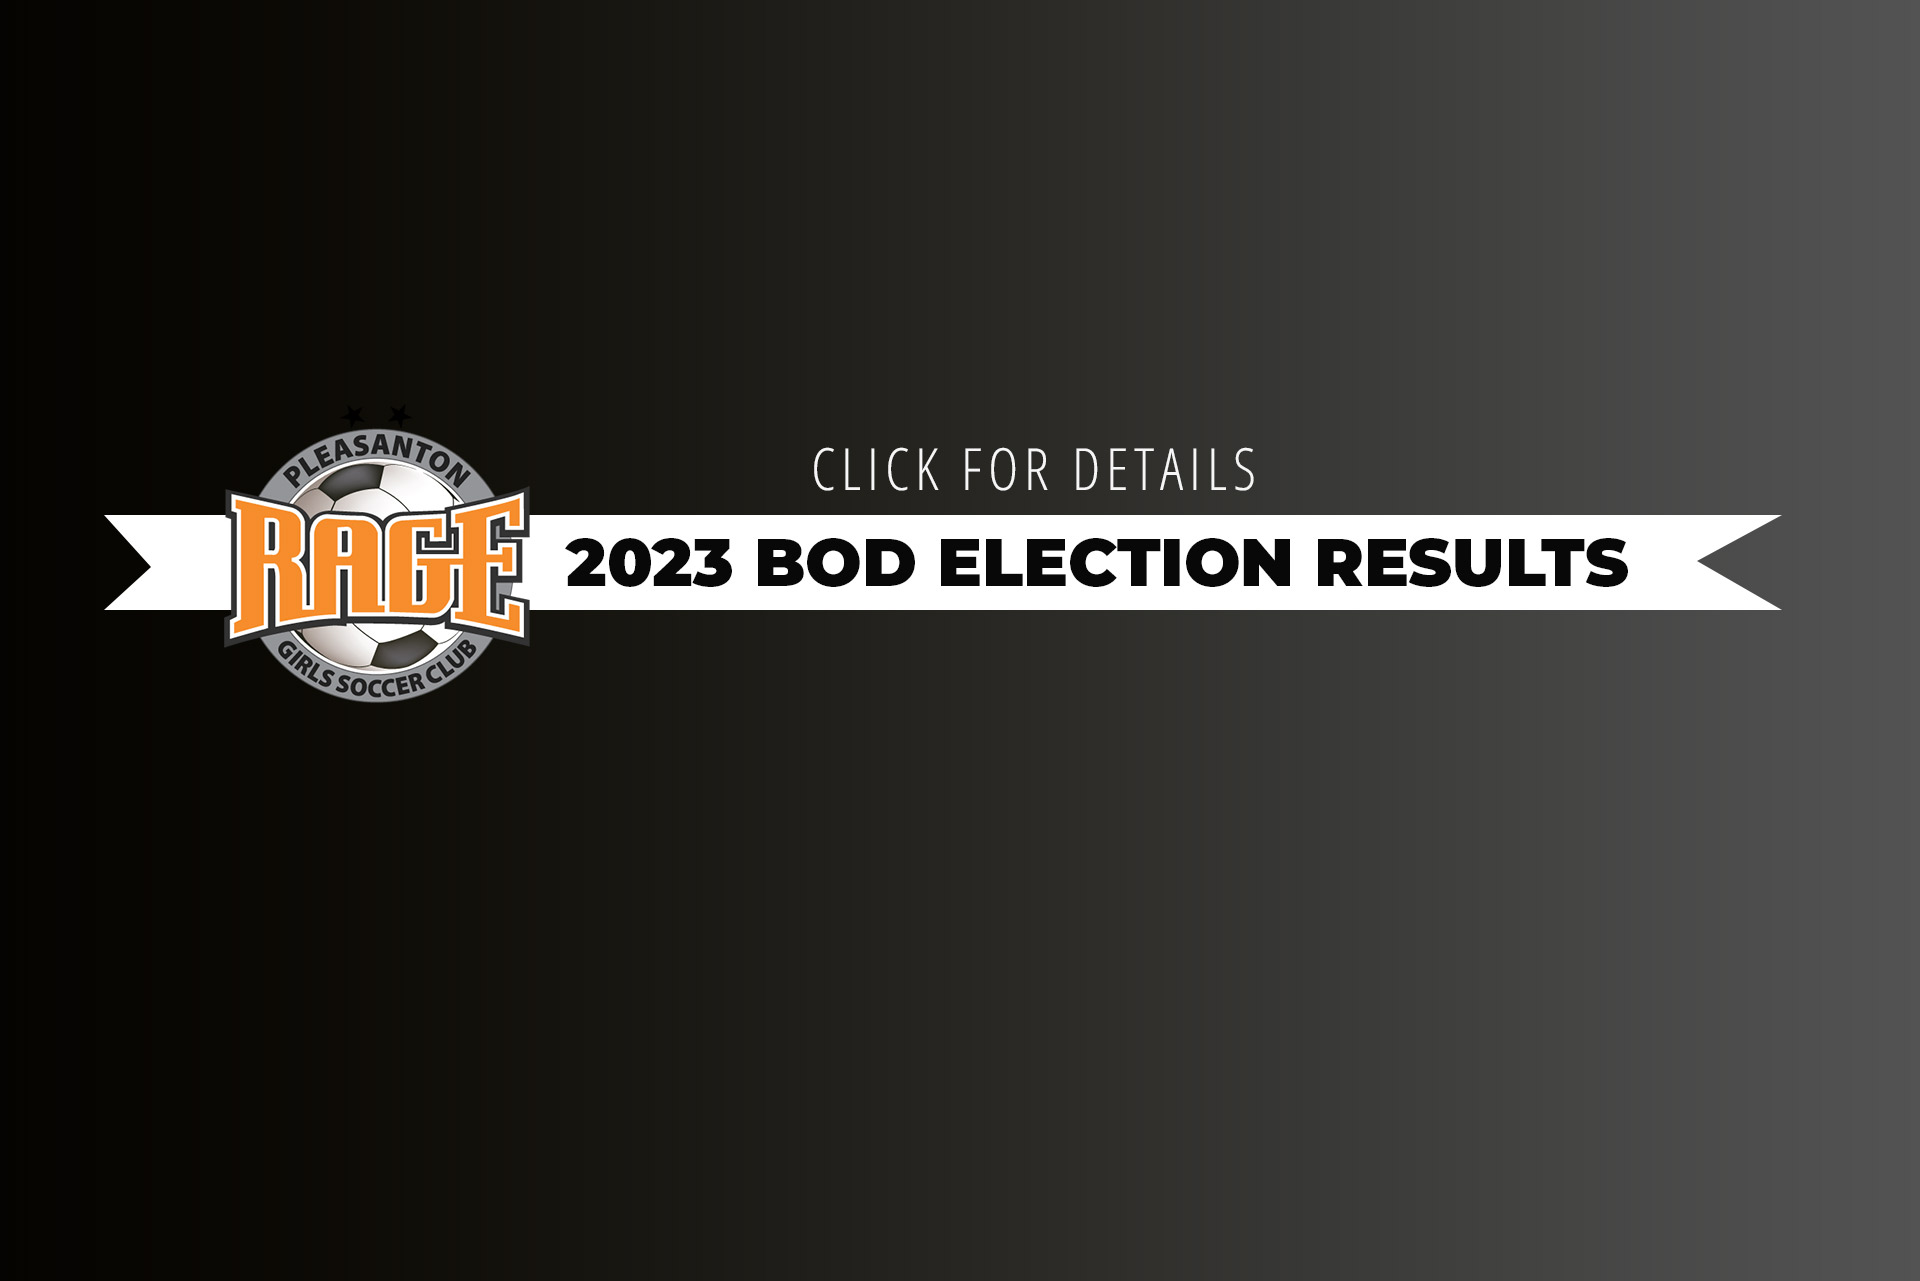 BOD election results